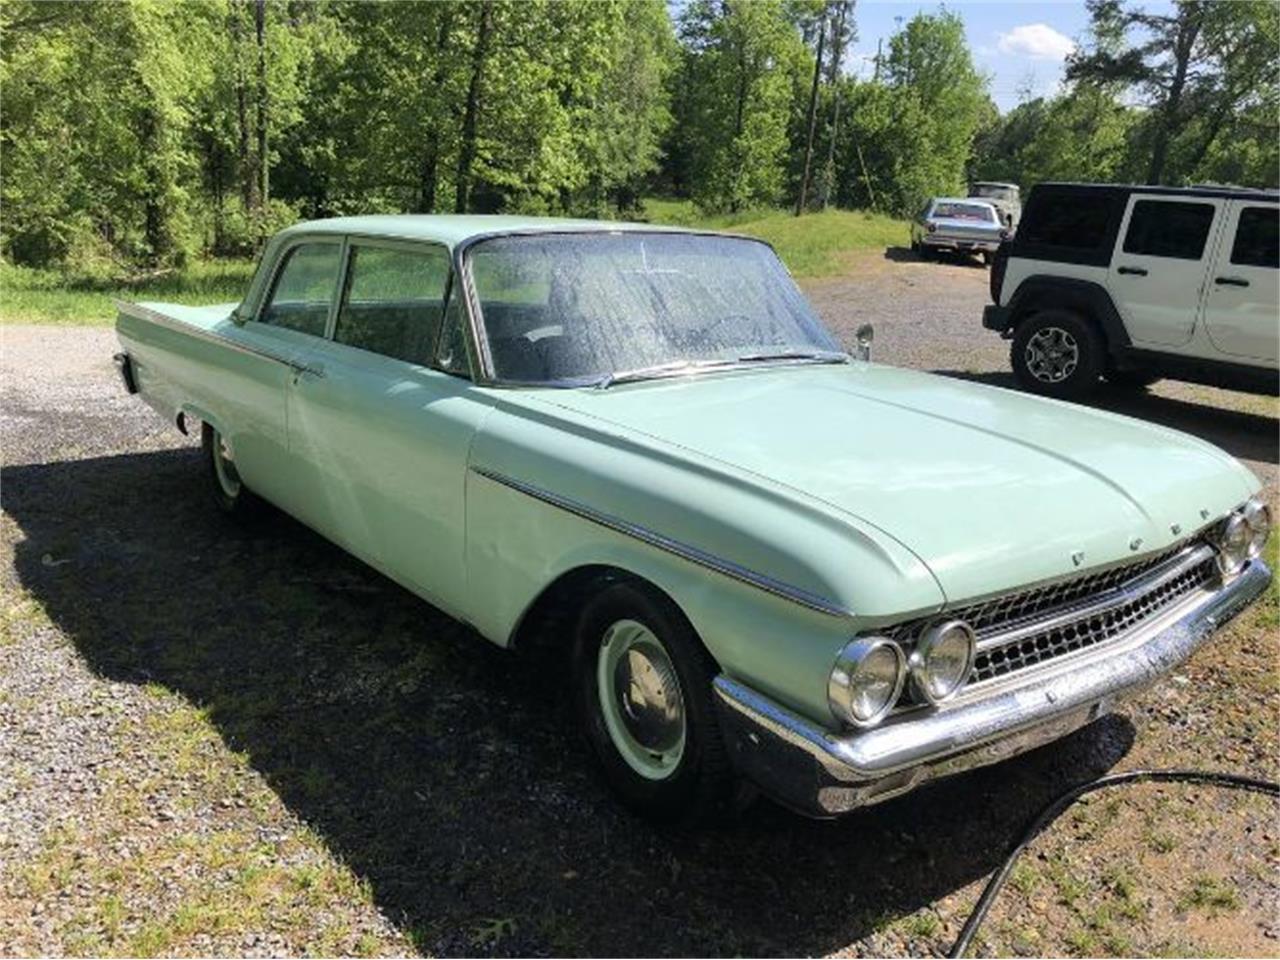 1961 ford fairlane 500 for sale classiccars com cc 1230621 1961 ford fairlane 500 for sale